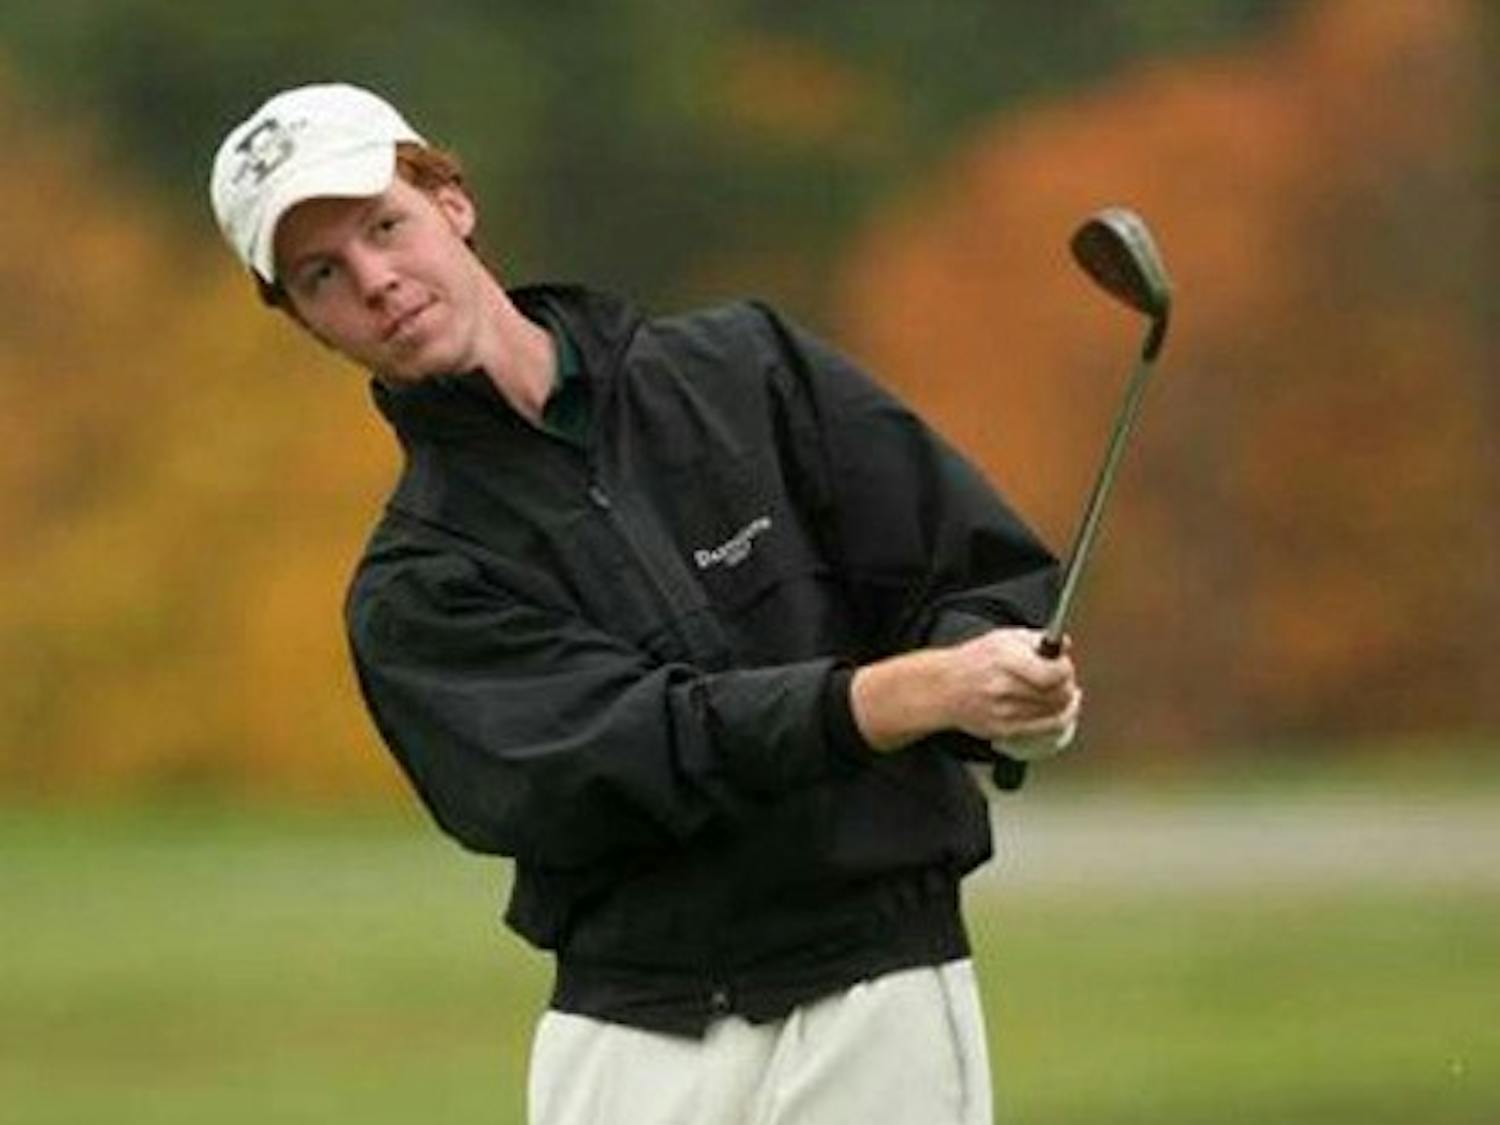 Captain Jamie Wallace '08 shot a two-day 152 to finish tied for 15th place.